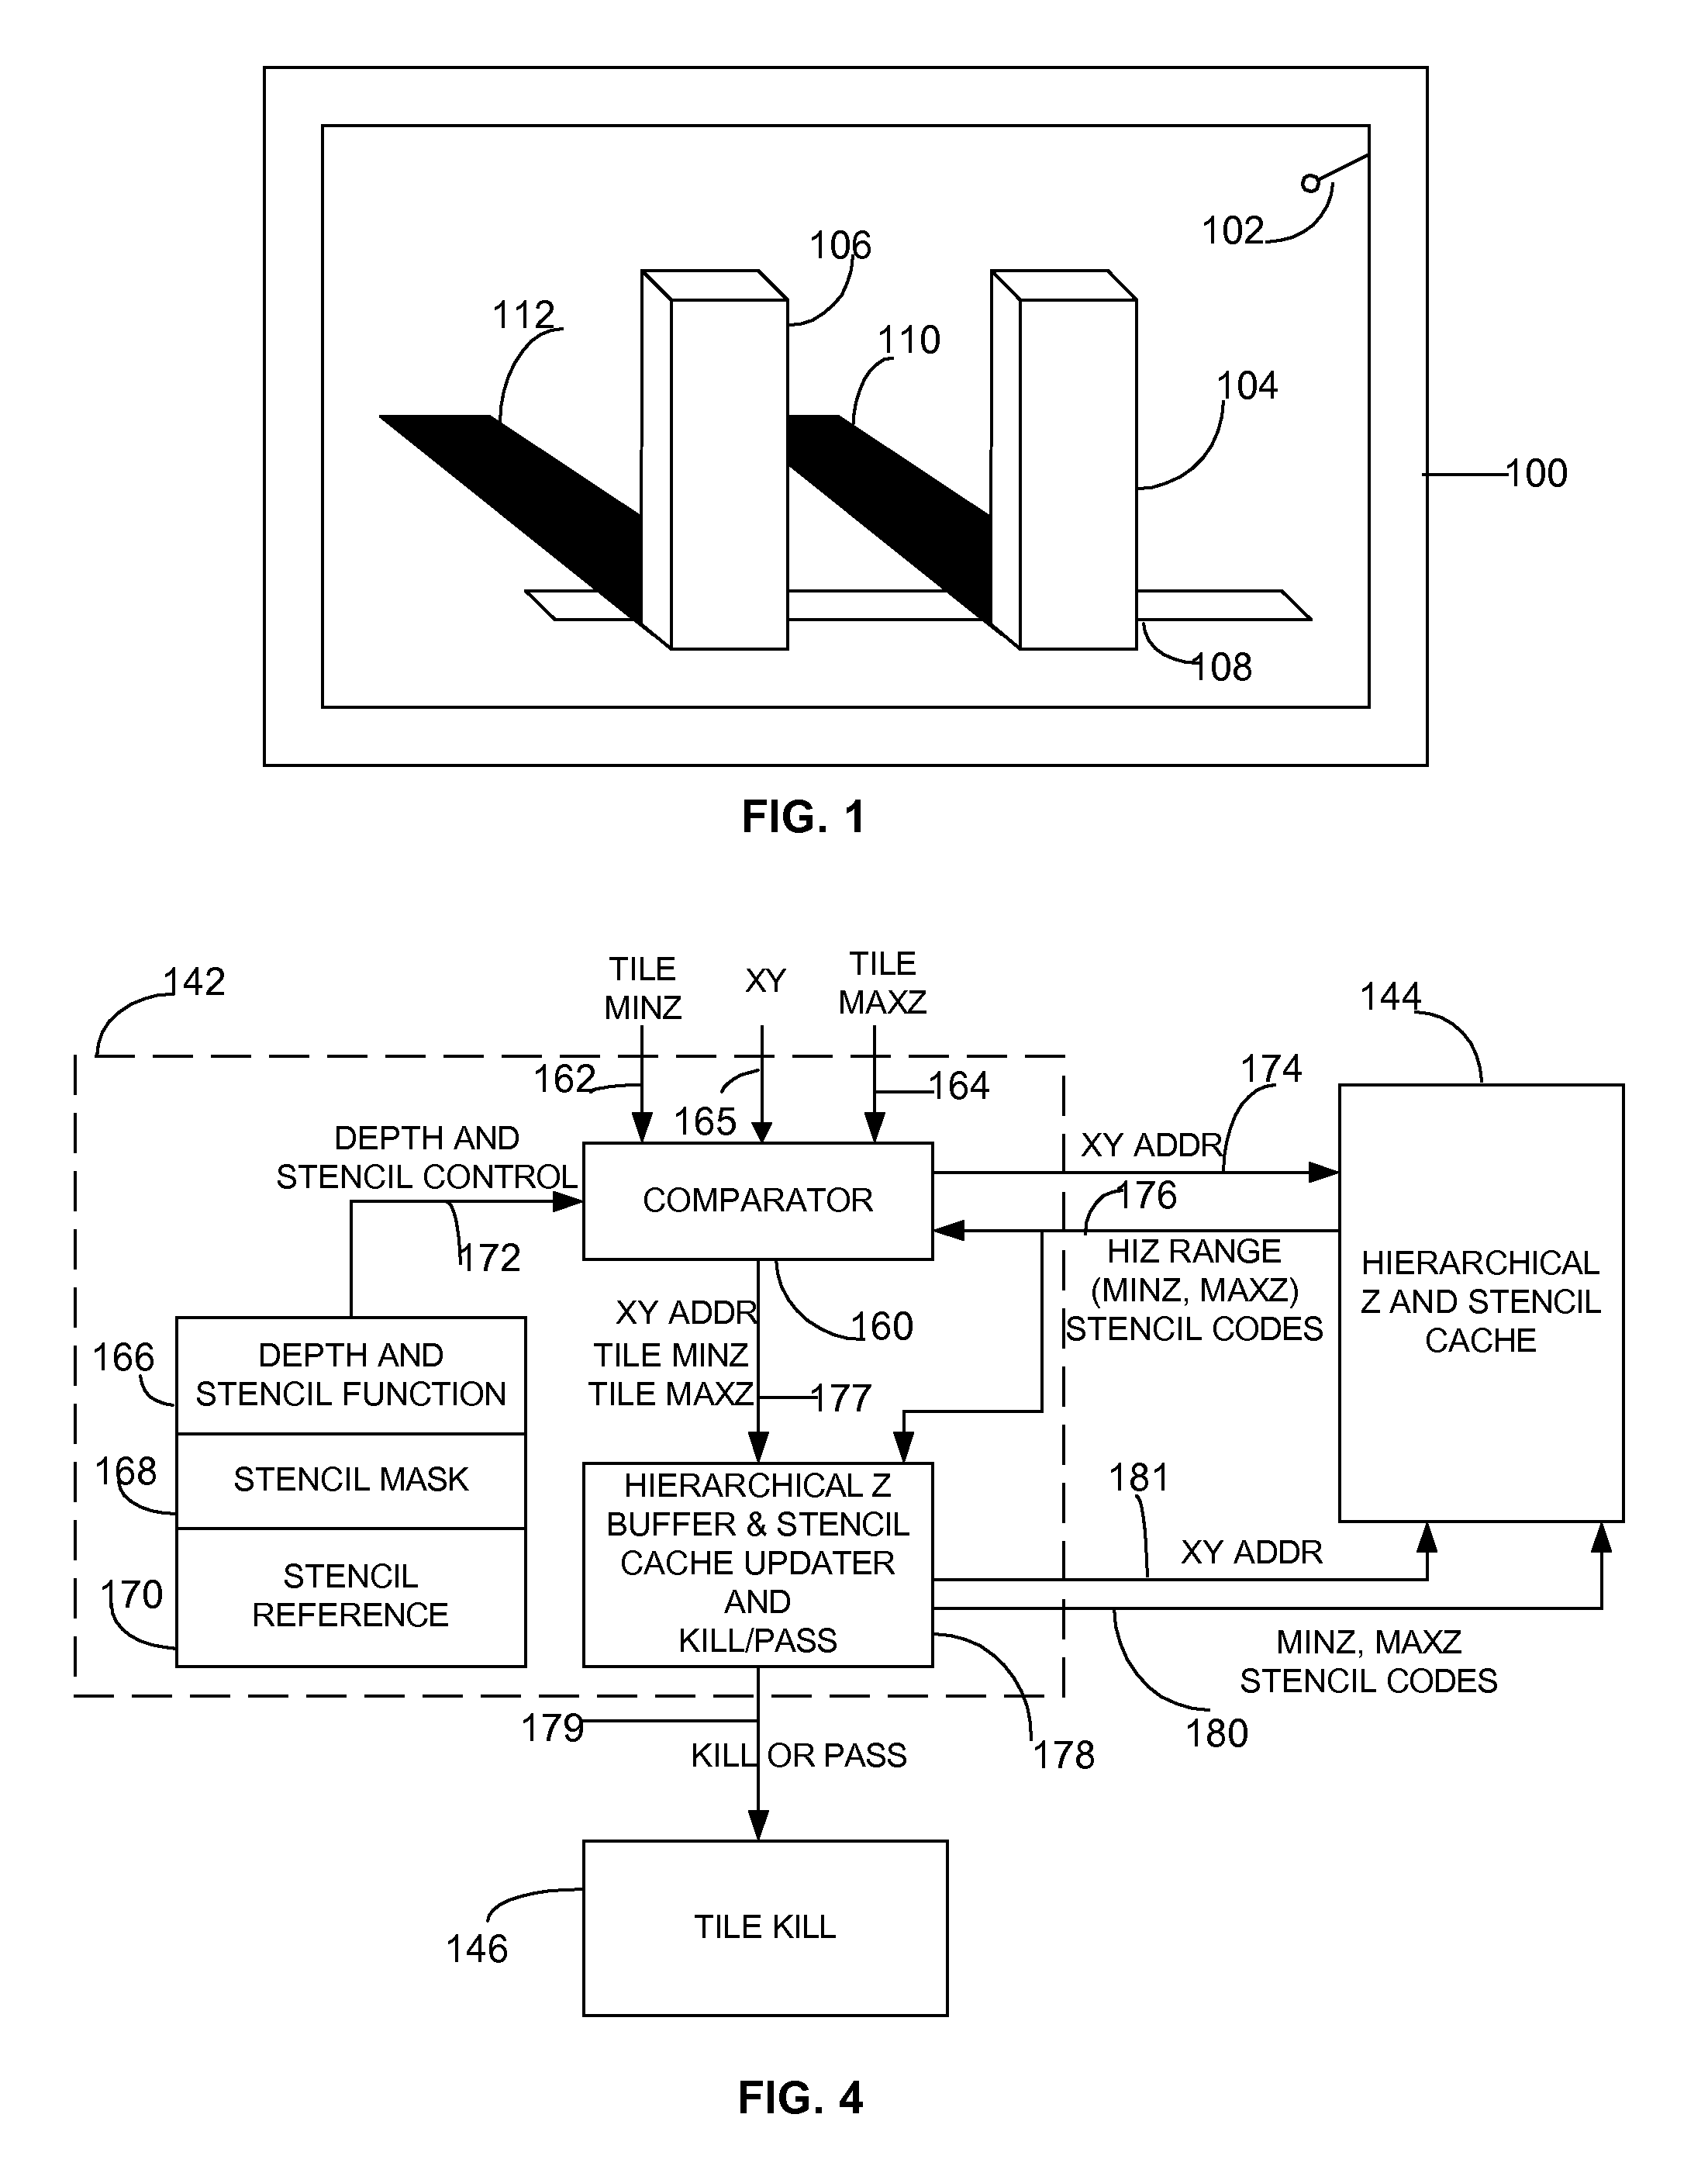 Method and apparatus for hierarchical Z buffering and stenciling